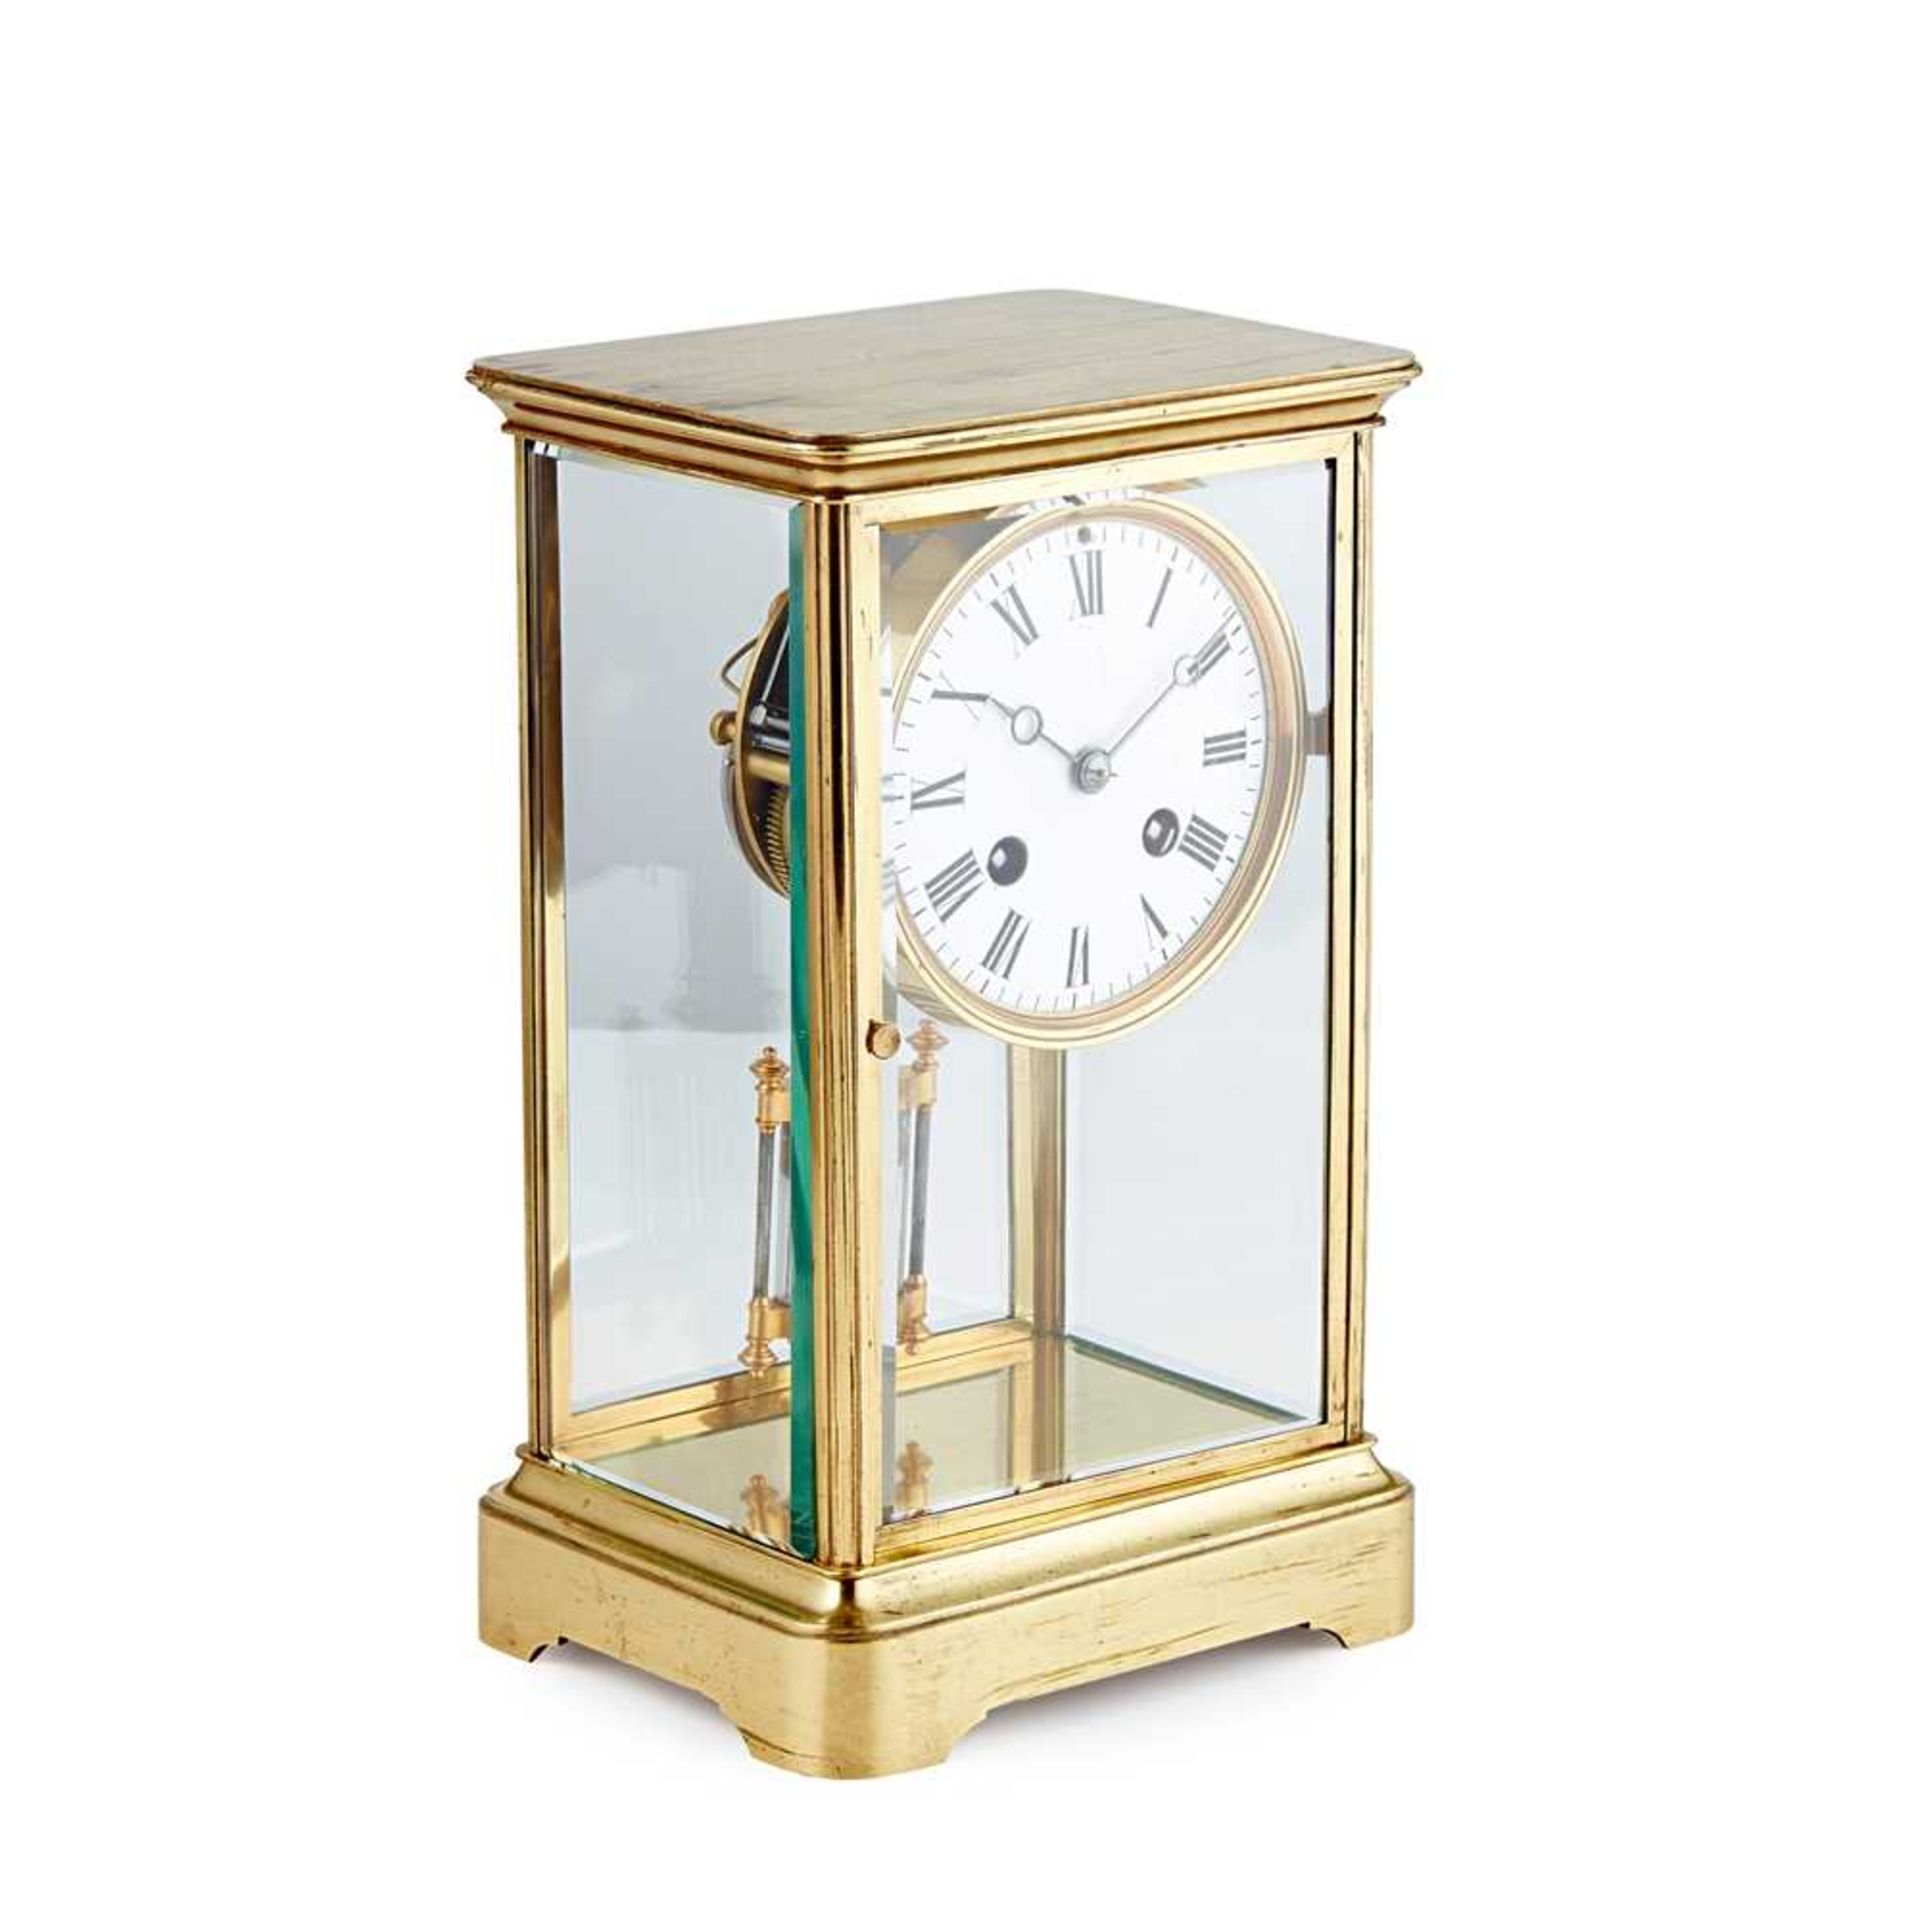 FRENCH BRASS FOUR GLASS MANTEL CLOCK, JAPY FRÈRES & CO. 19TH CENTURY